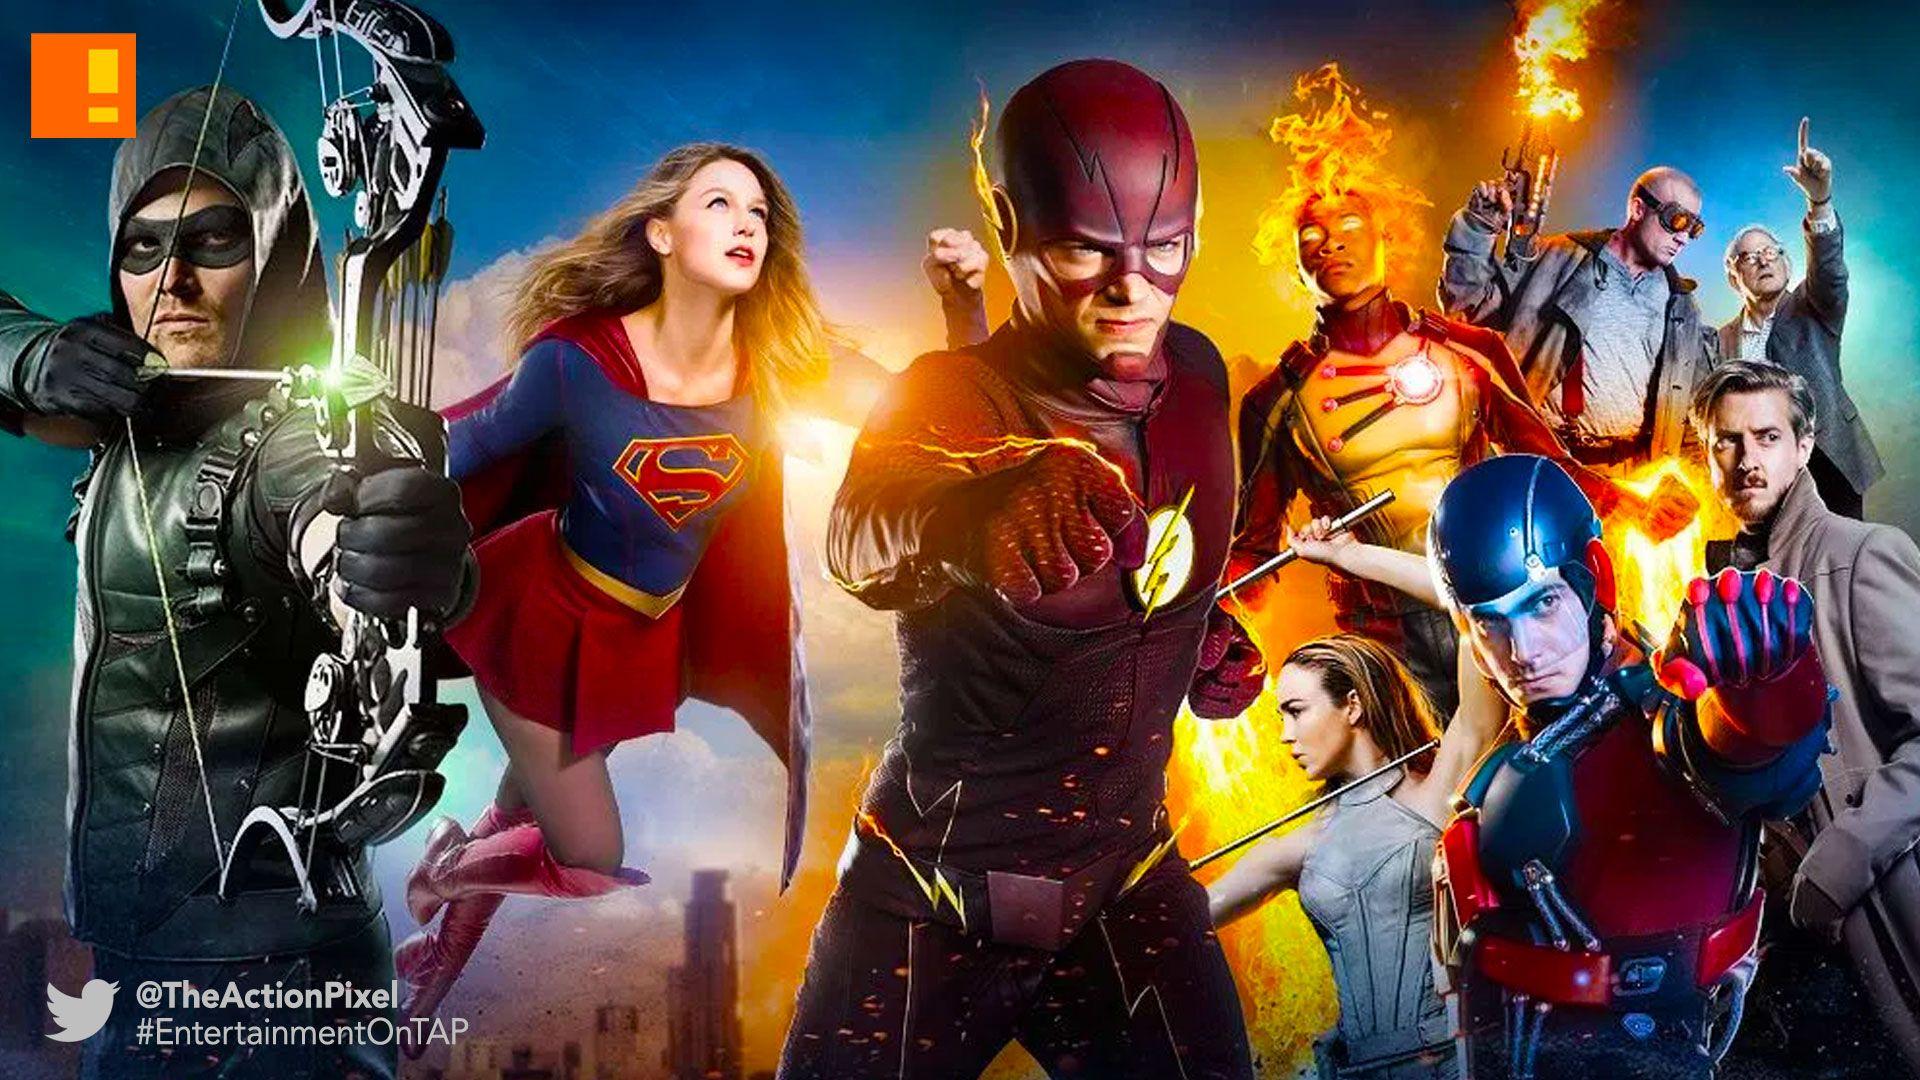 Supergirl, The Flash, Legends Of Tomorrow and Arrow crossover